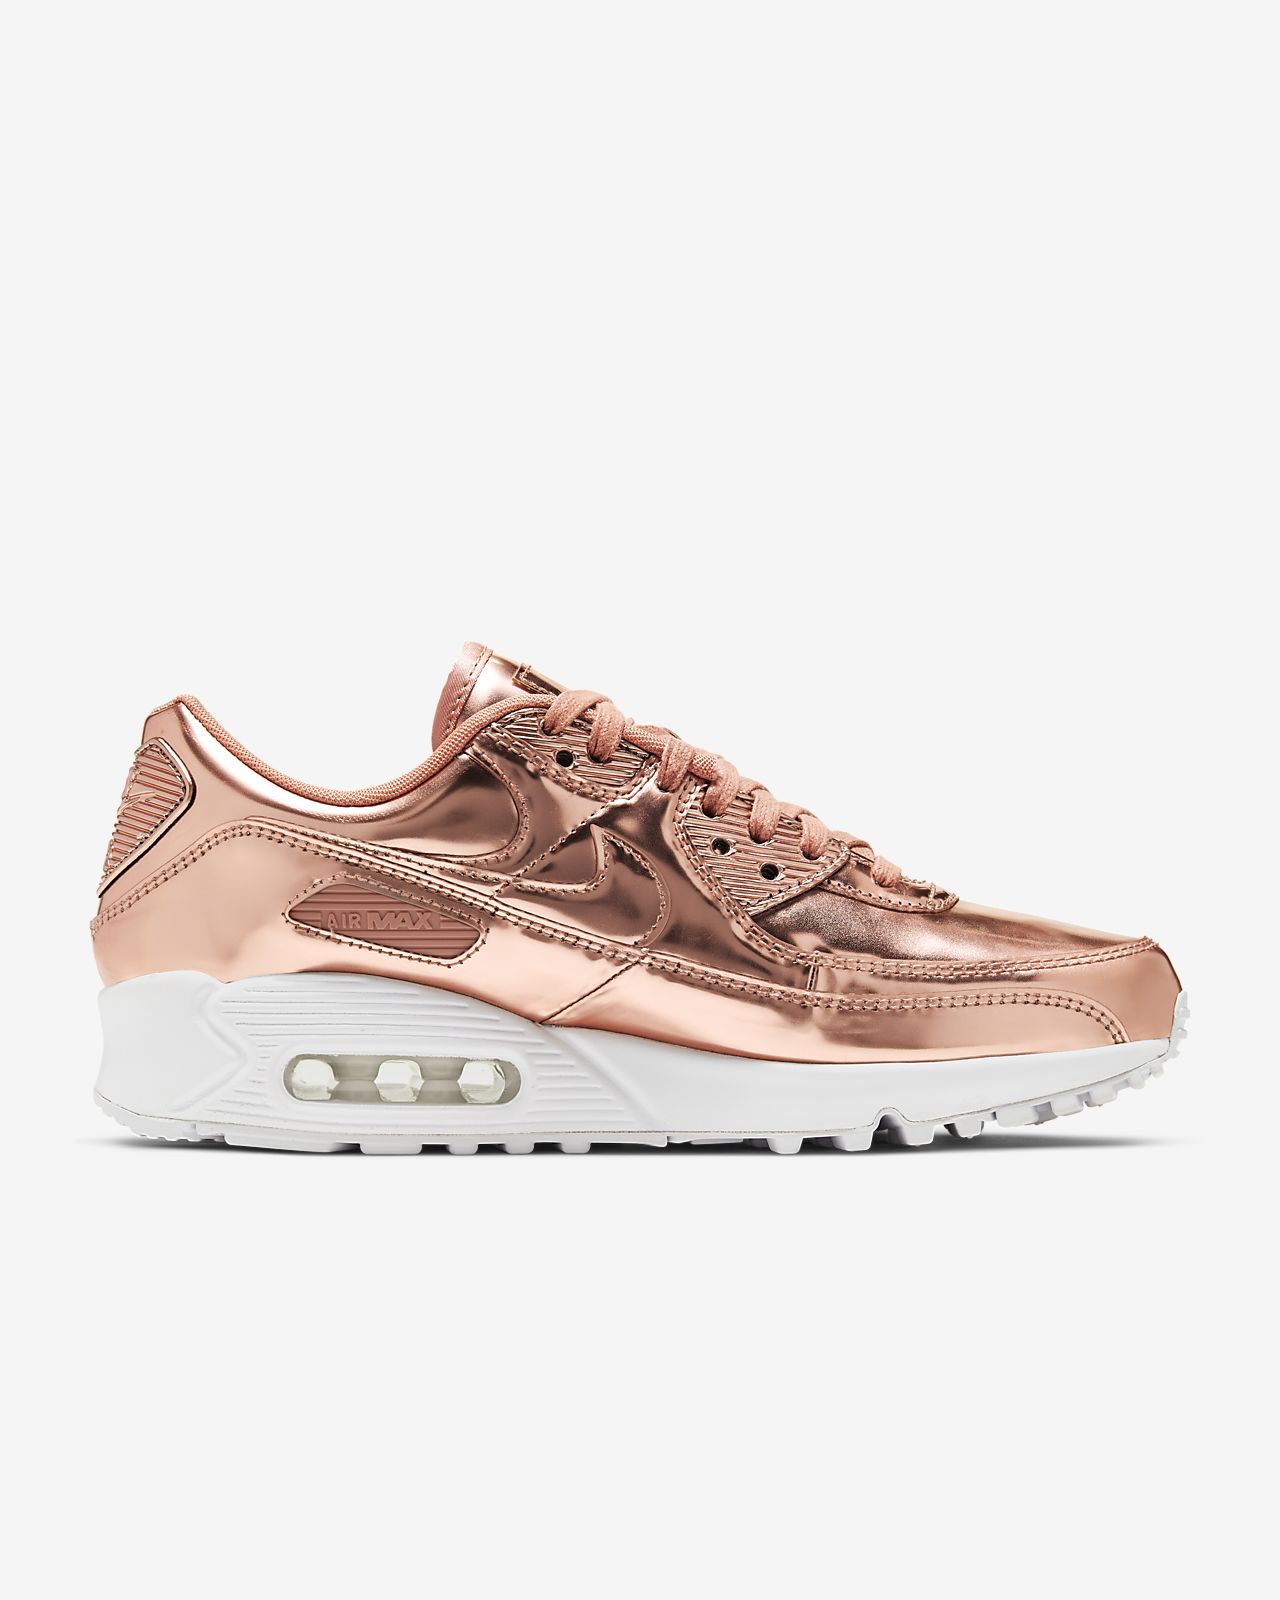 nike silver rosa gold